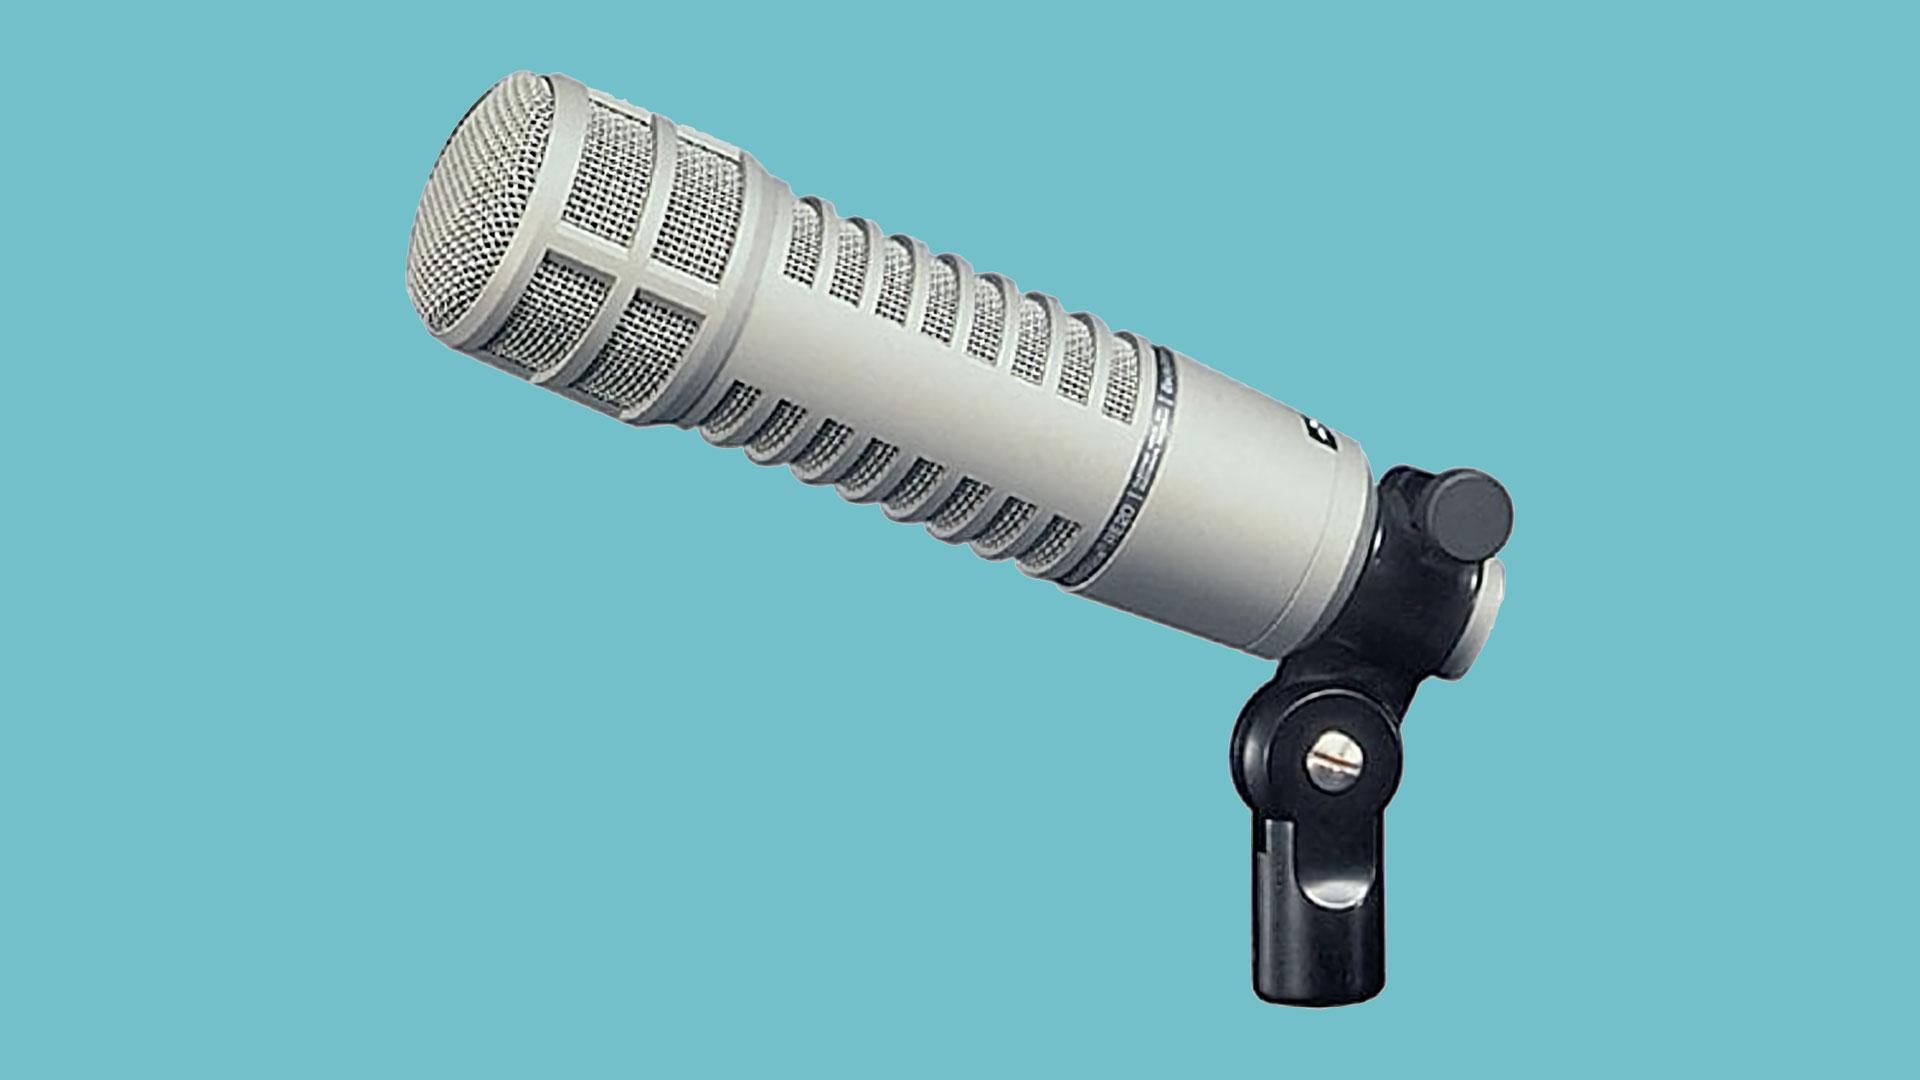 The Electro-Voice RE-20 is a great microphone for podcasting.